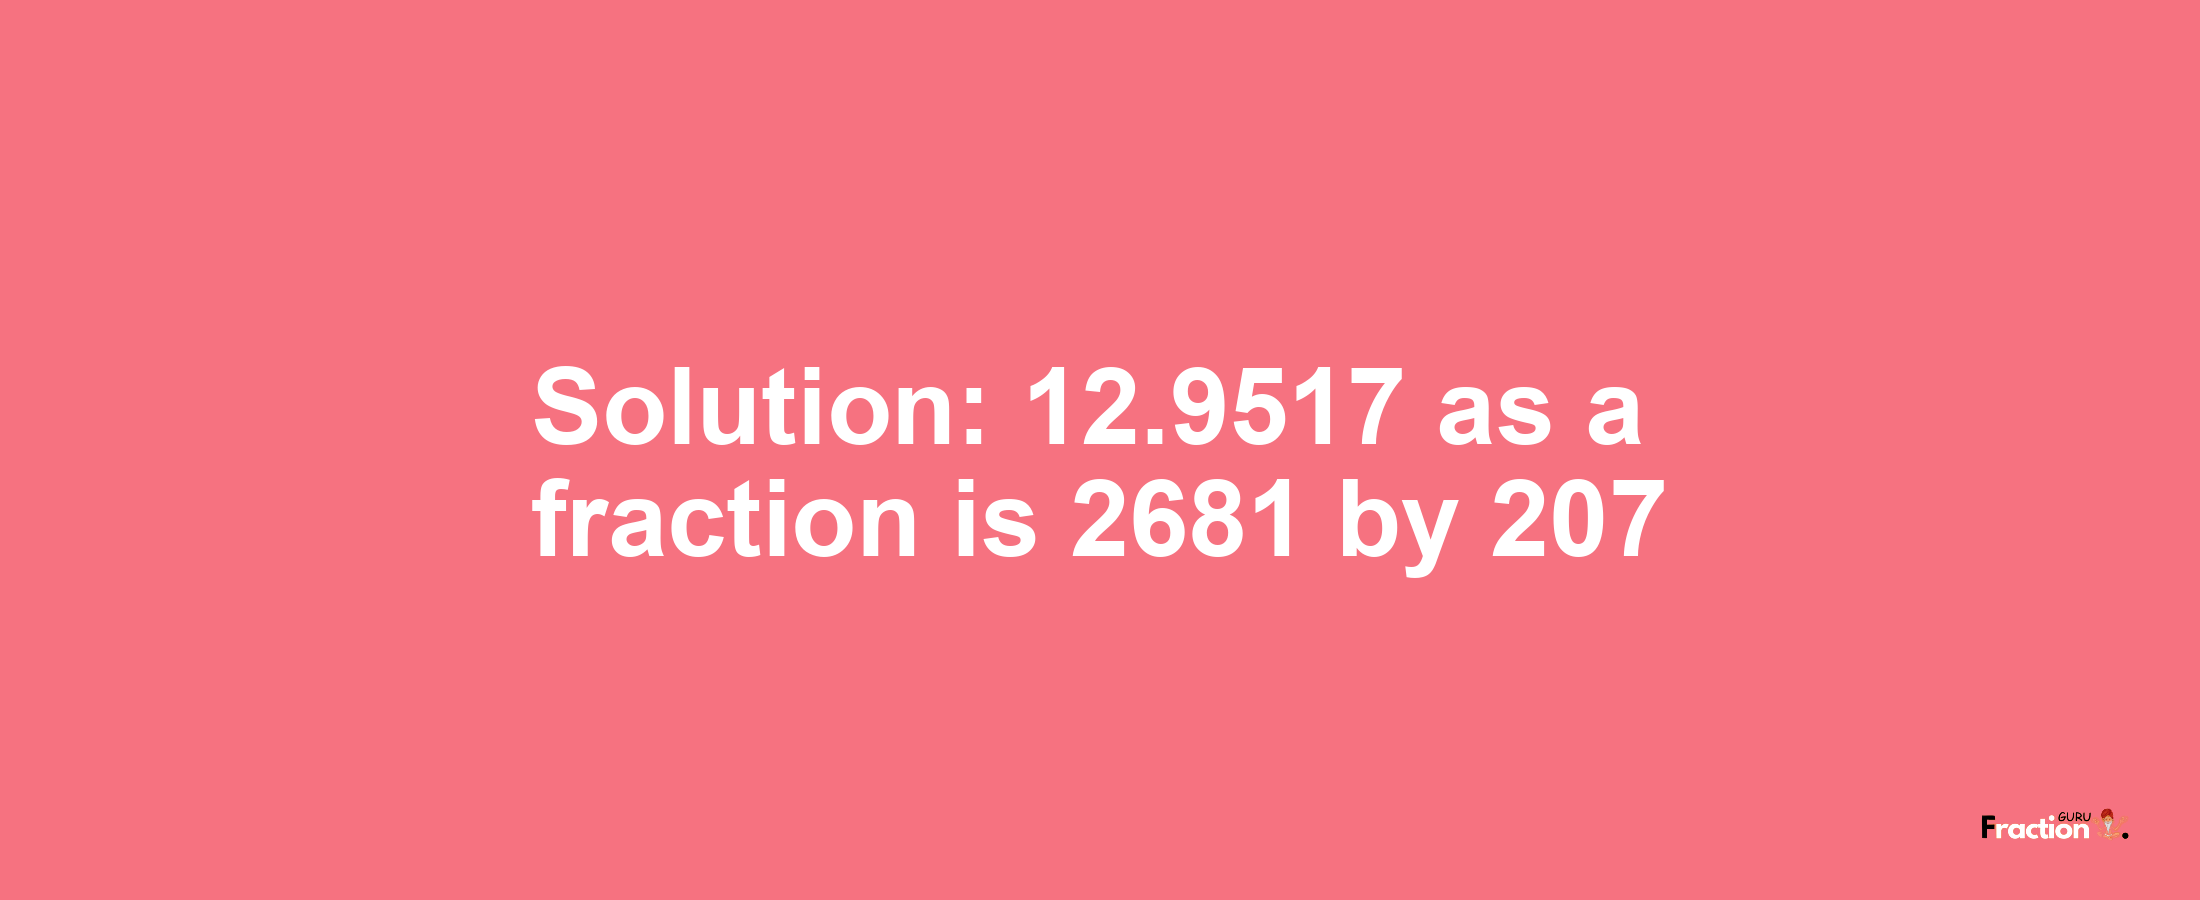 Solution:12.9517 as a fraction is 2681/207